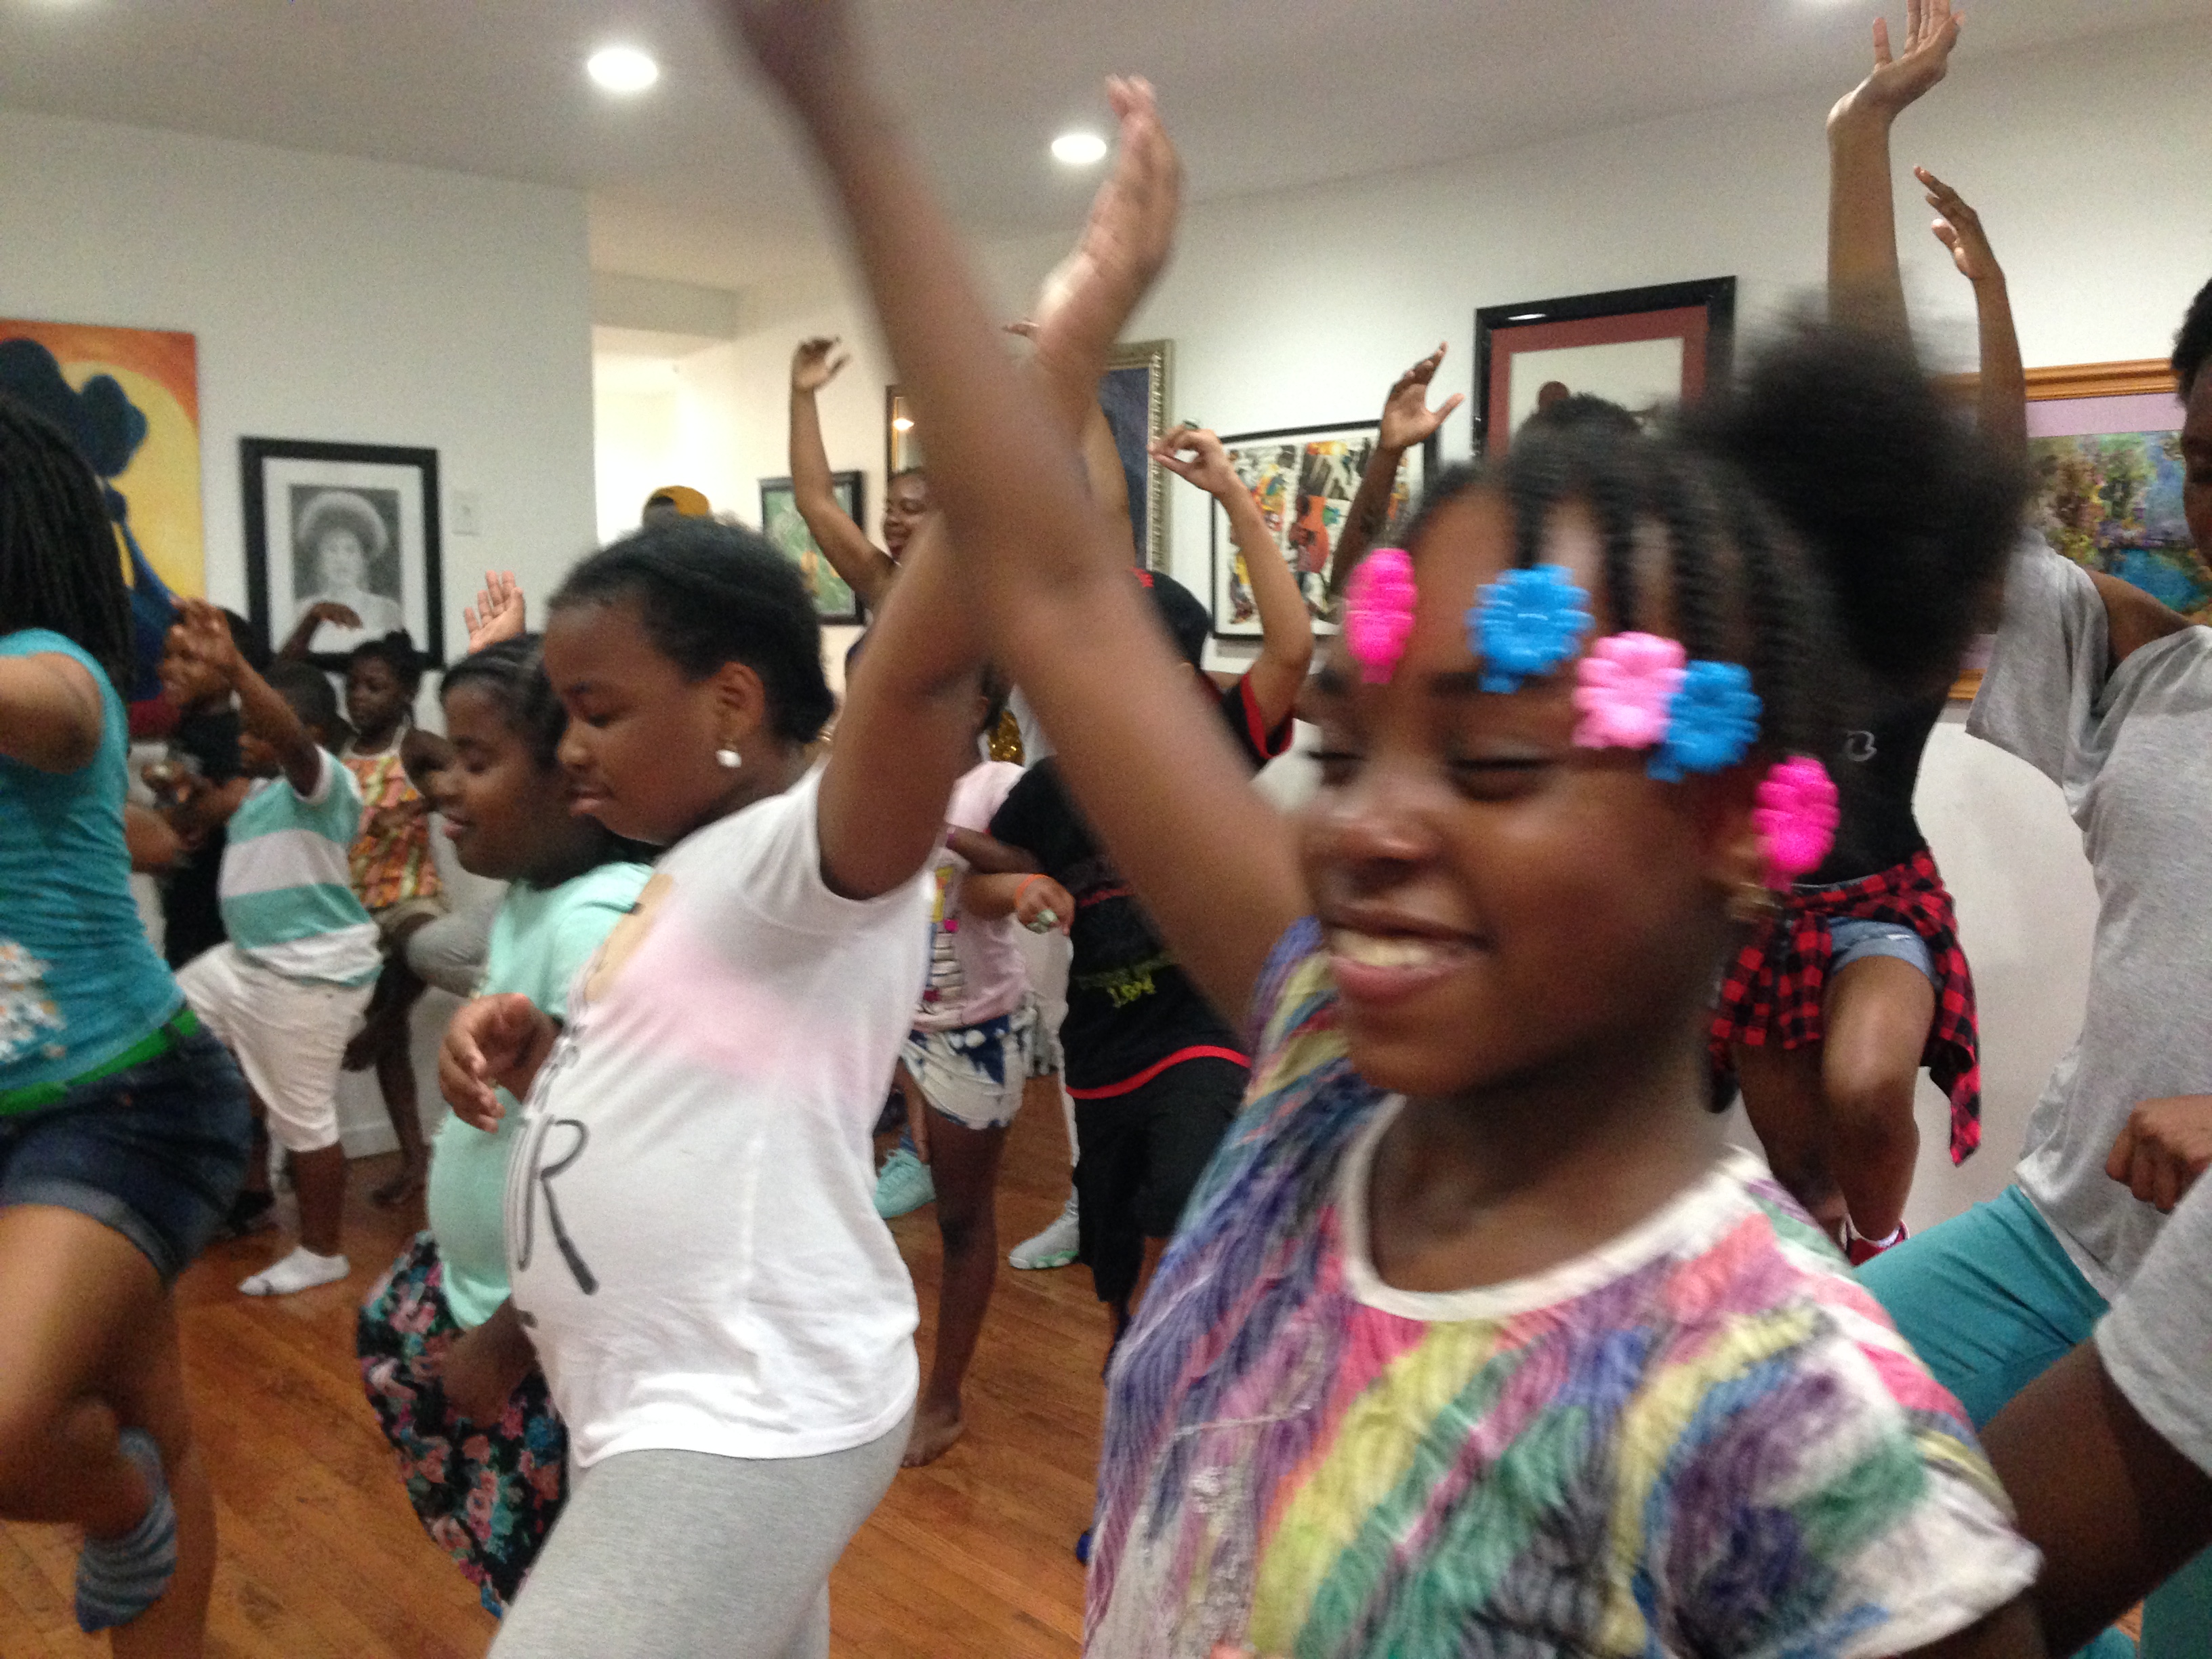 Young ladies demonstrate a “tree pose” (yoga position) with their eyes closed, during Bailey’s Café’s six-week free arts-based rites of passage summer program for young people ages 9 to 19.